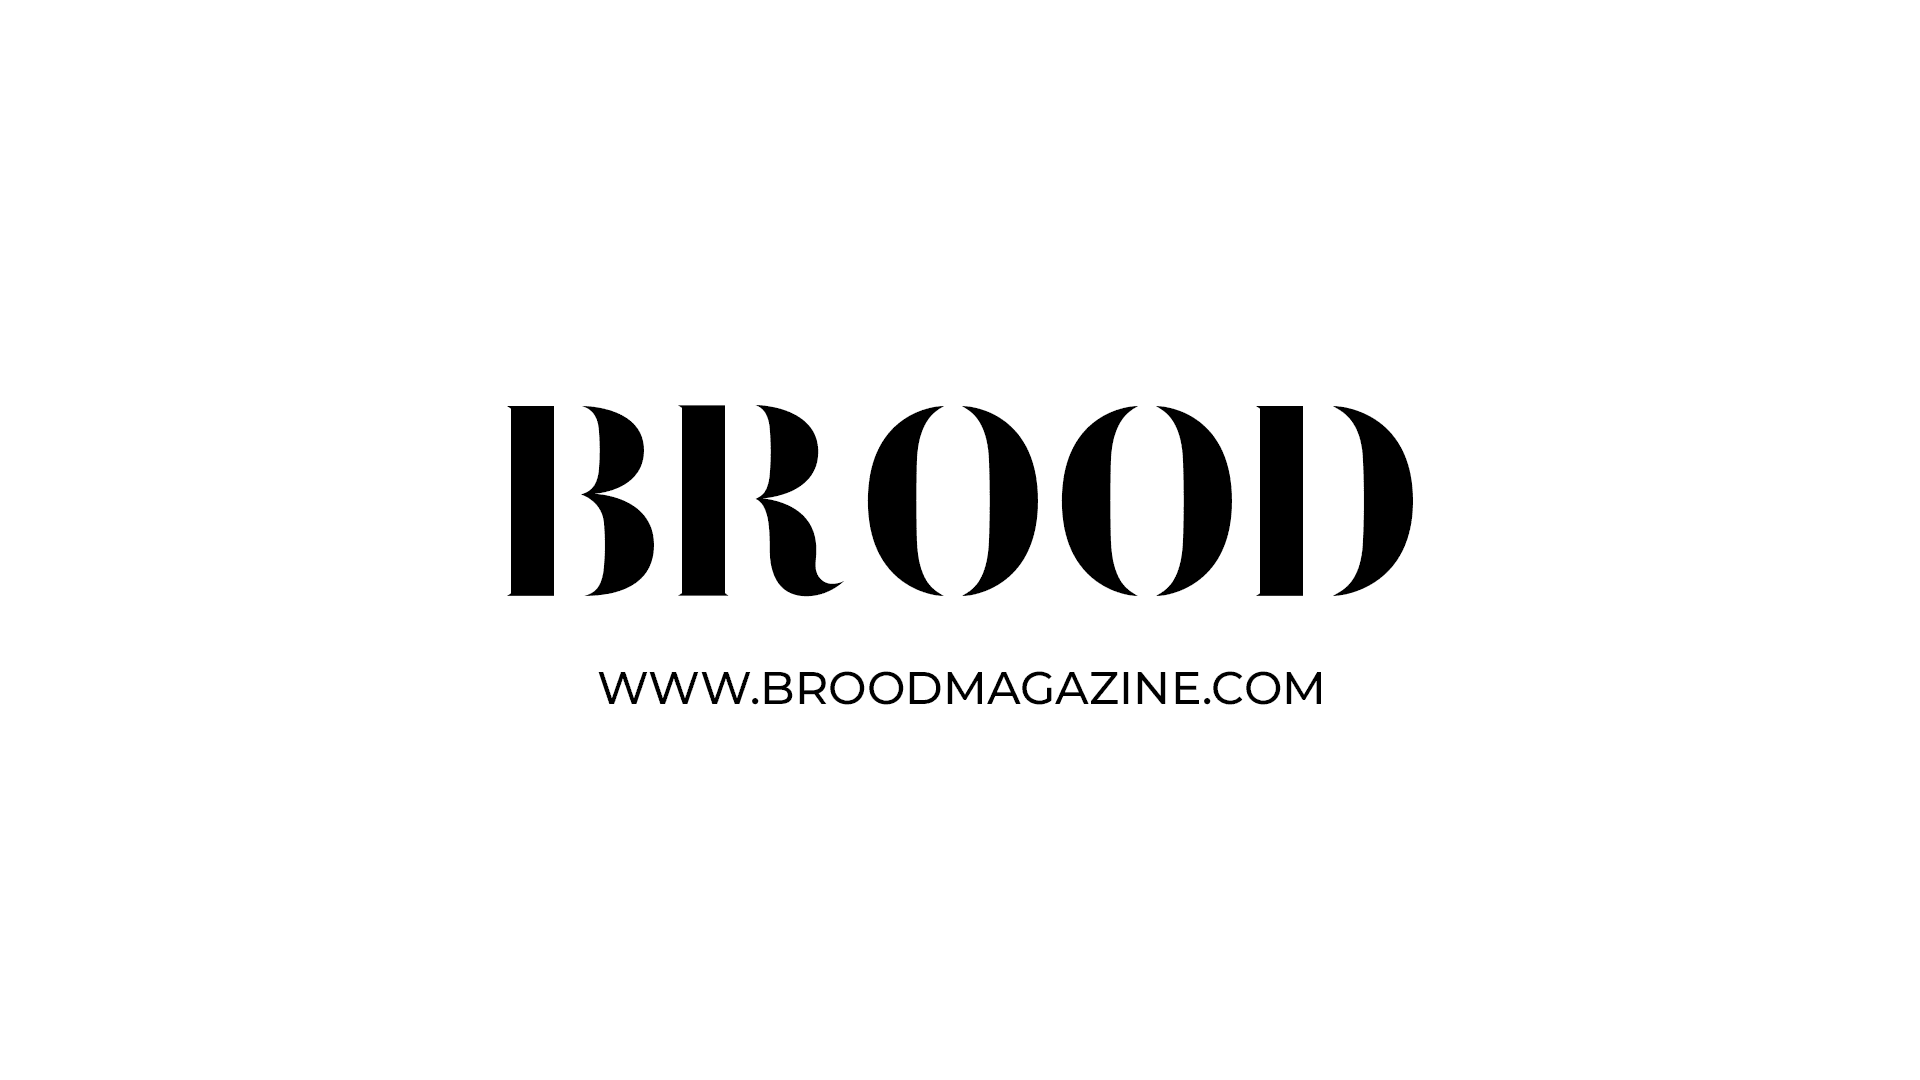 Our co-founder lolo stubbs explains the delay in the launch and the essence of brood 🤪